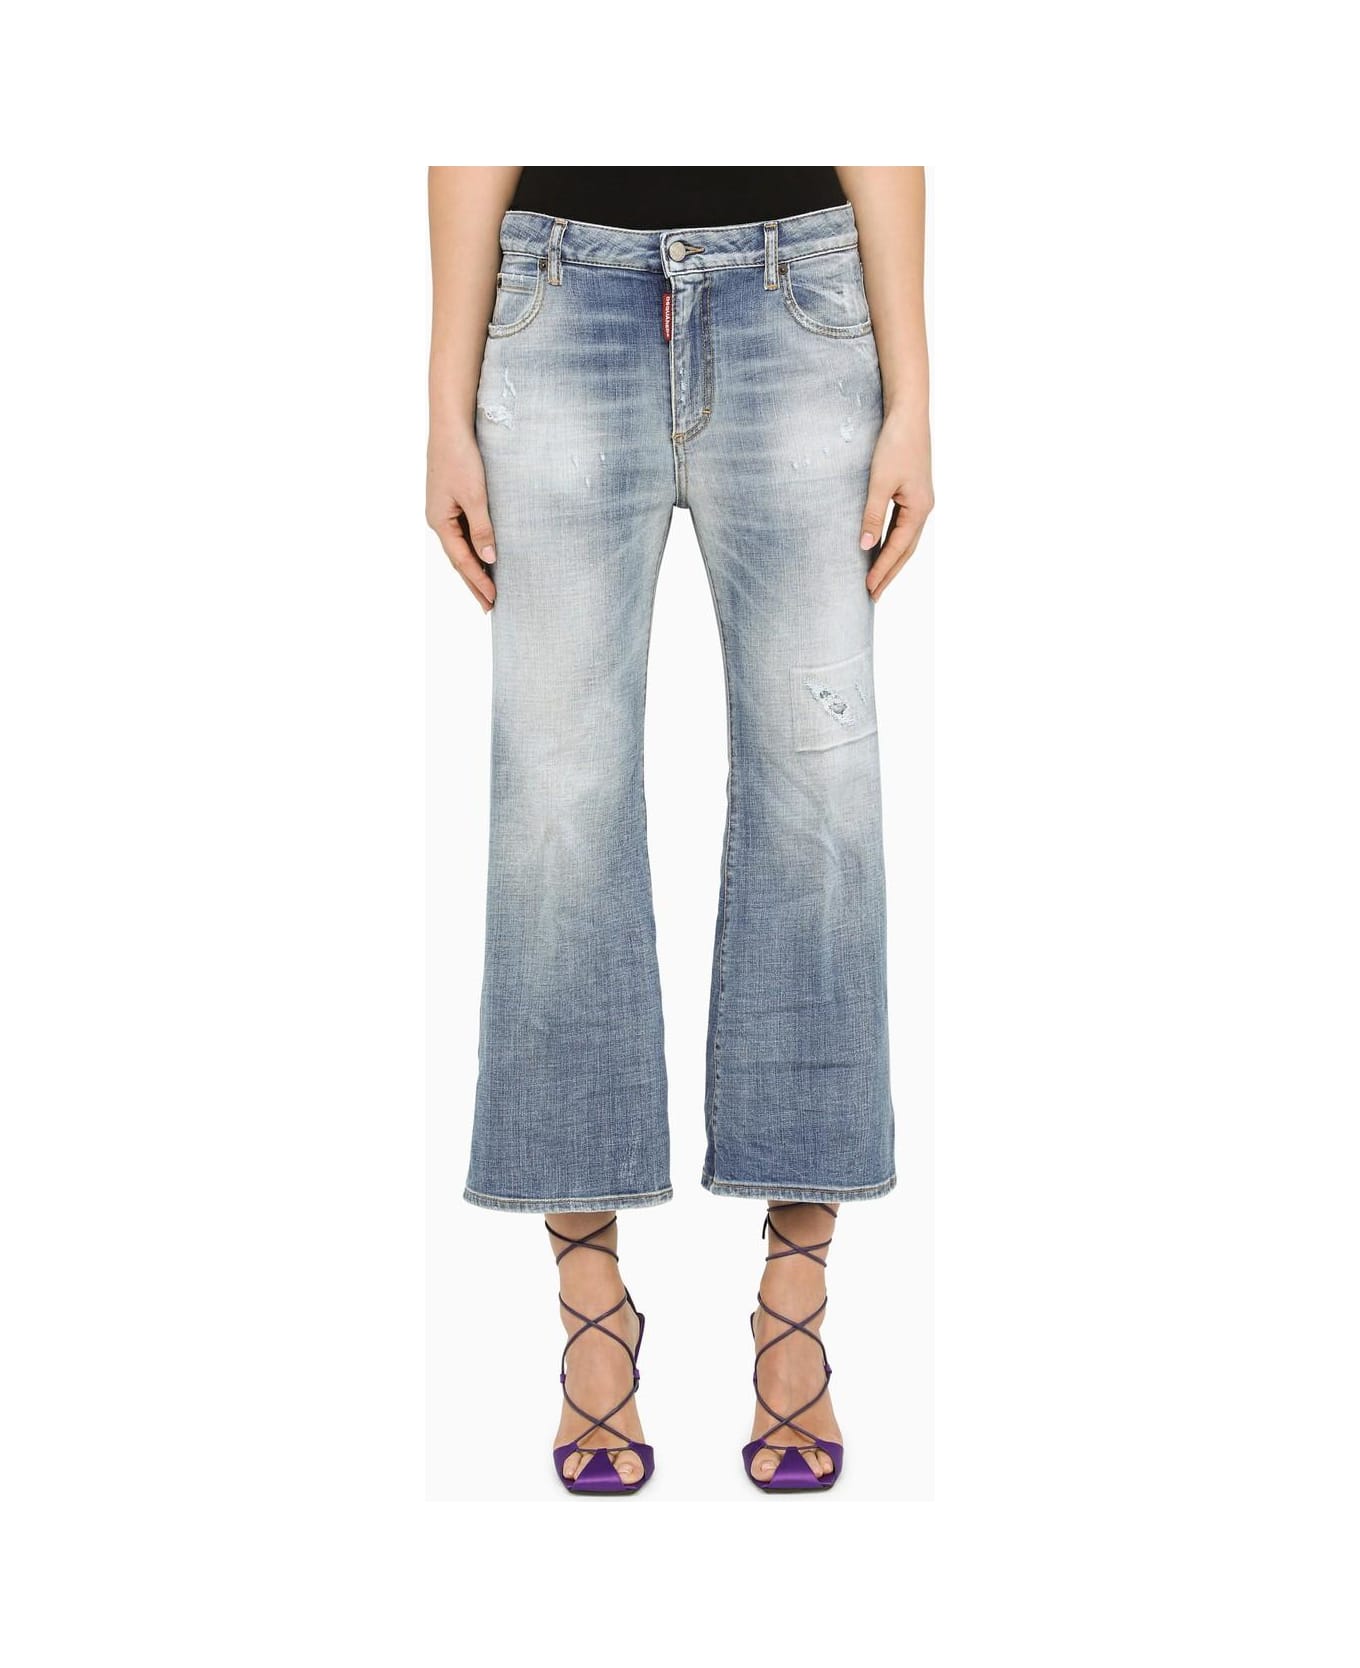 Dsquared2 Washed Blue Cropped Jeans - Navy Blue